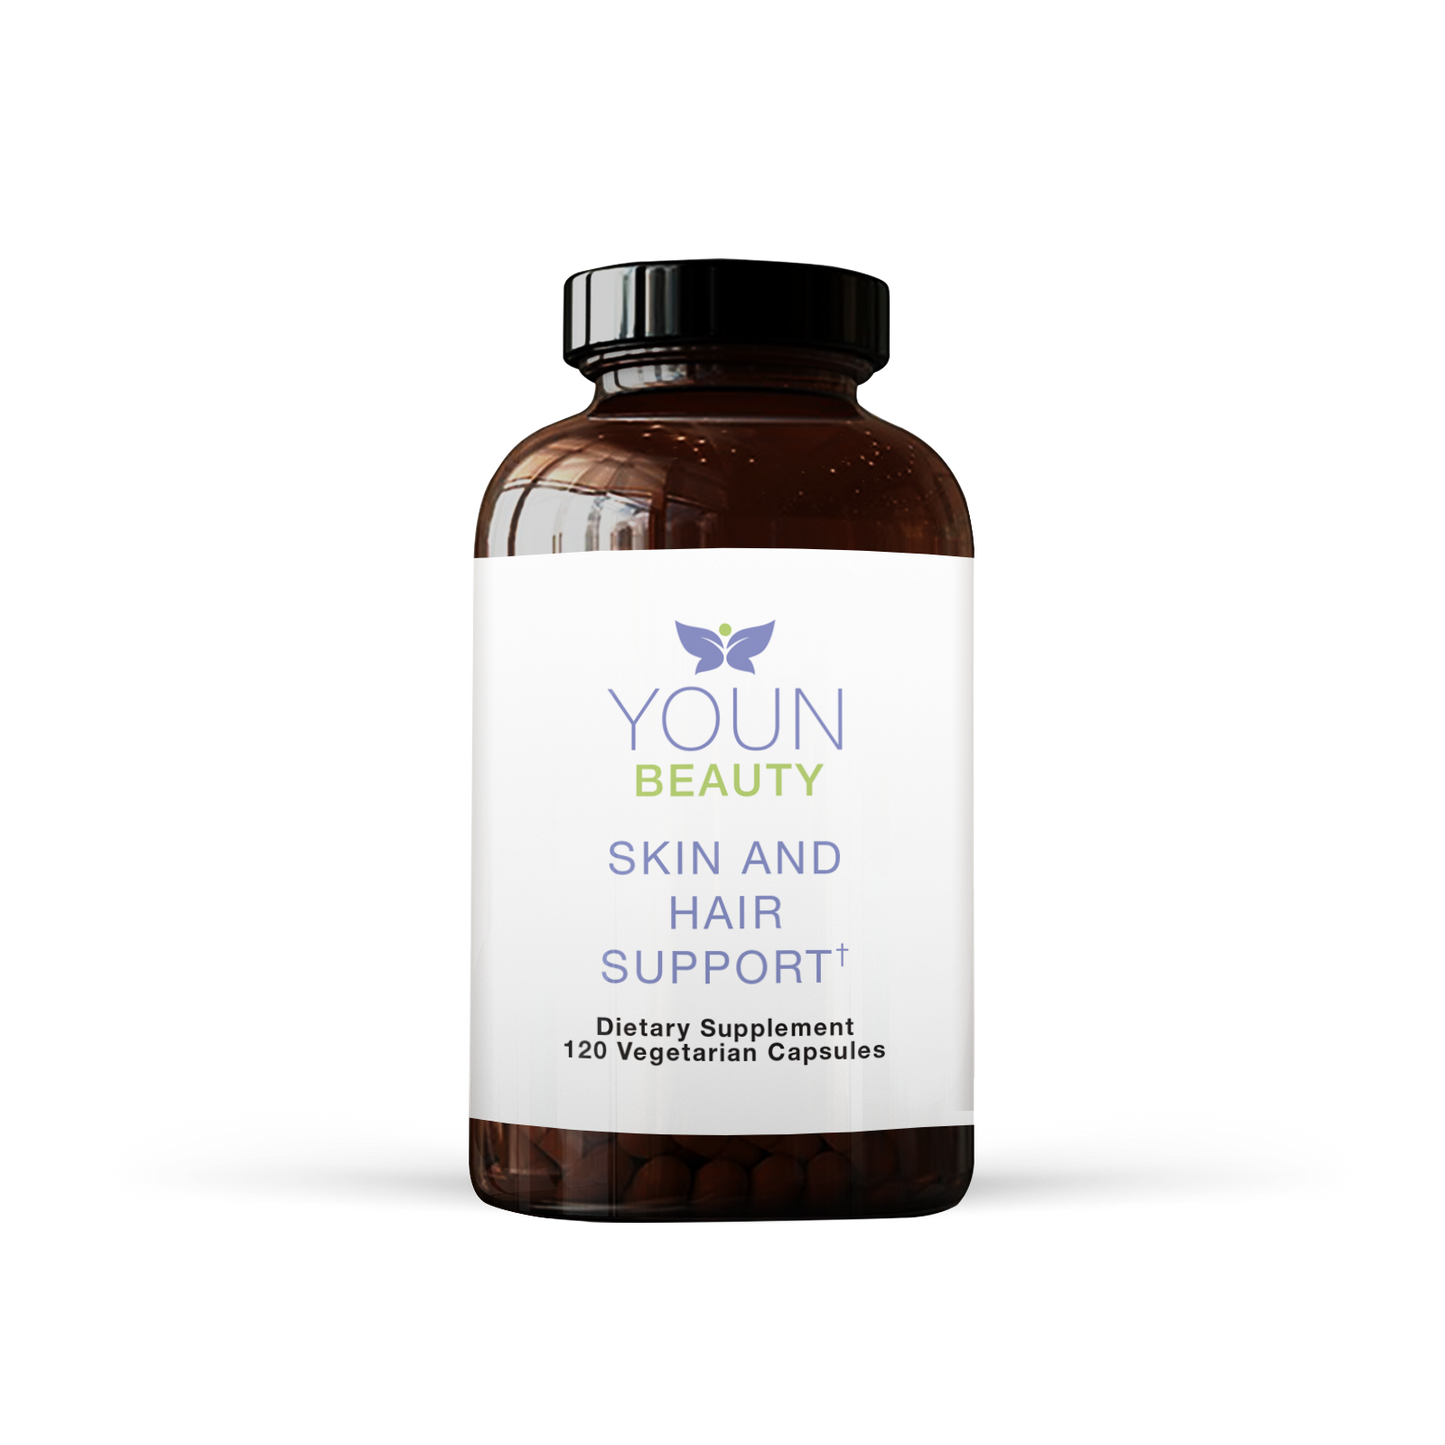 YOUN BEAUTY SKIN AND HAIR SUPPORT (Formerly Collagen Support)